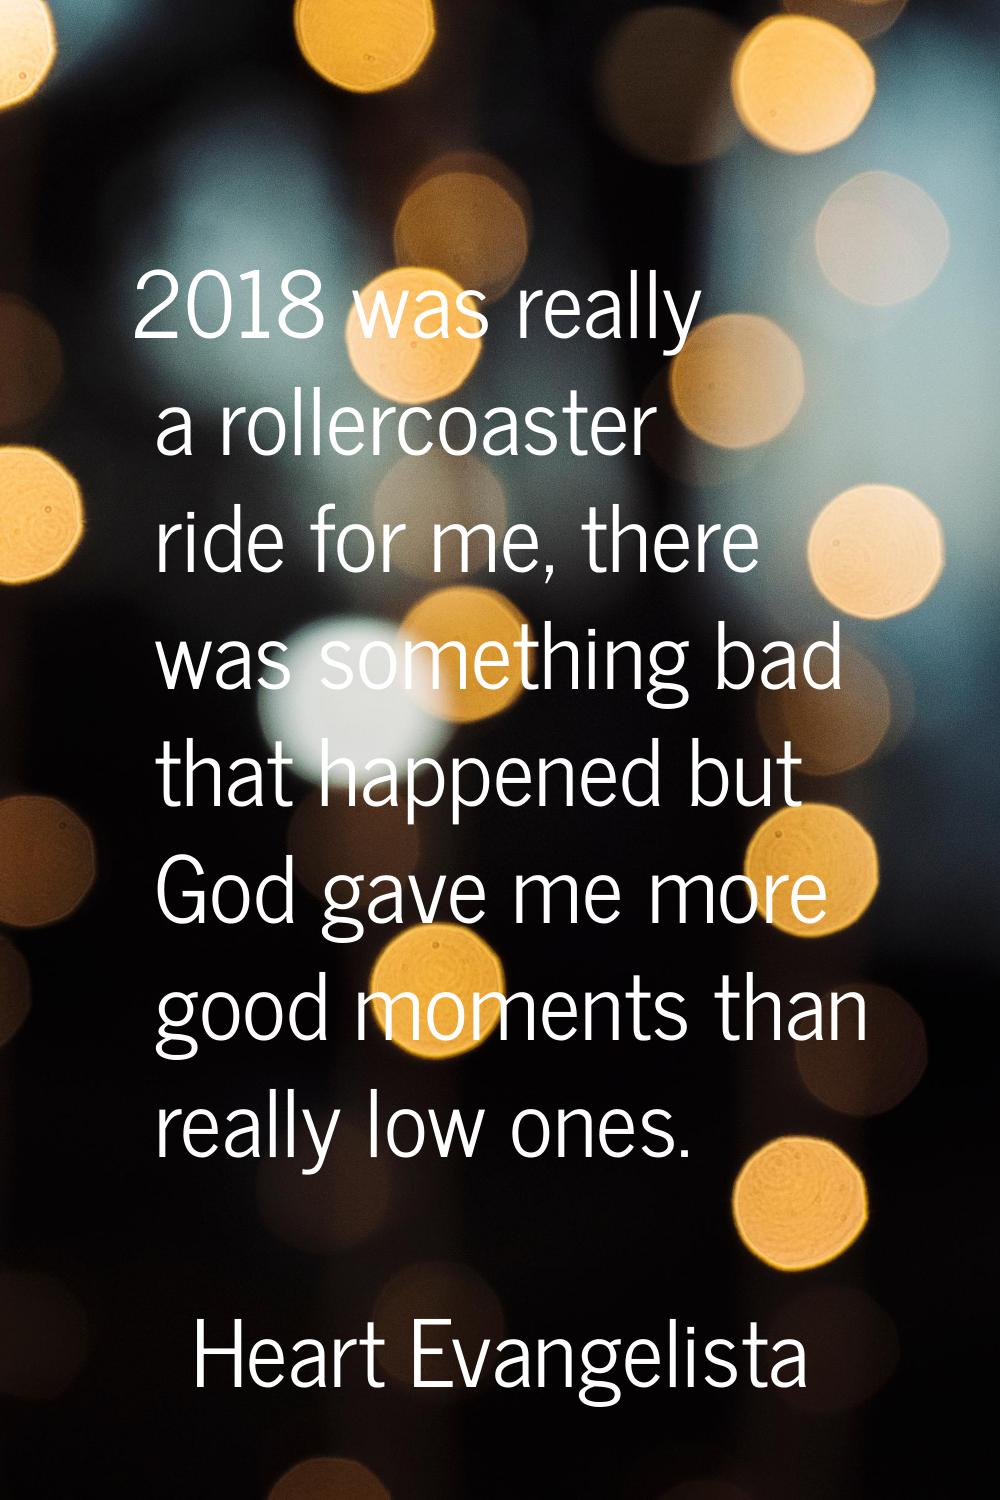 2018 was really a rollercoaster ride for me, there was something bad that happened but God gave me 